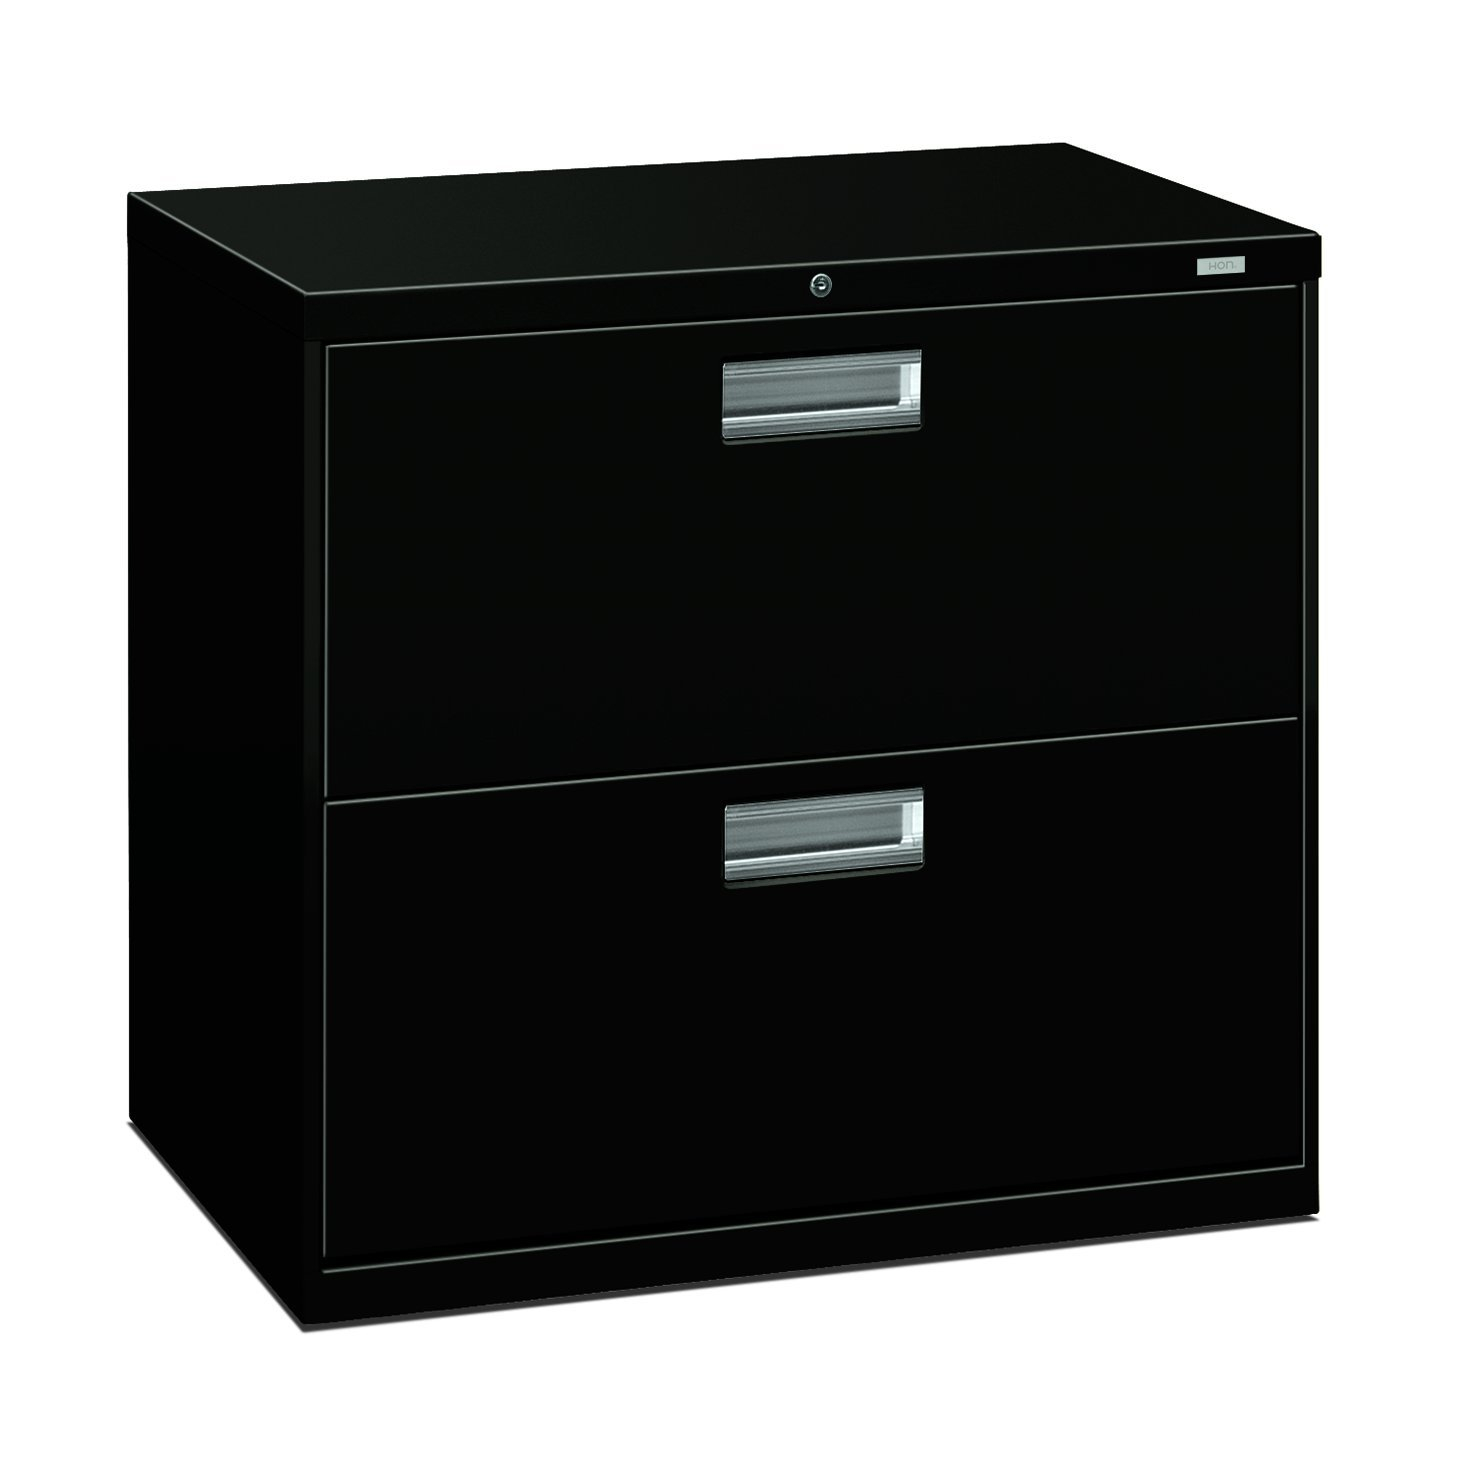 Outstanding Black File Cabinet 2 Drawer Metal Dividers Home Lockable intended for proportions 1465 X 1457